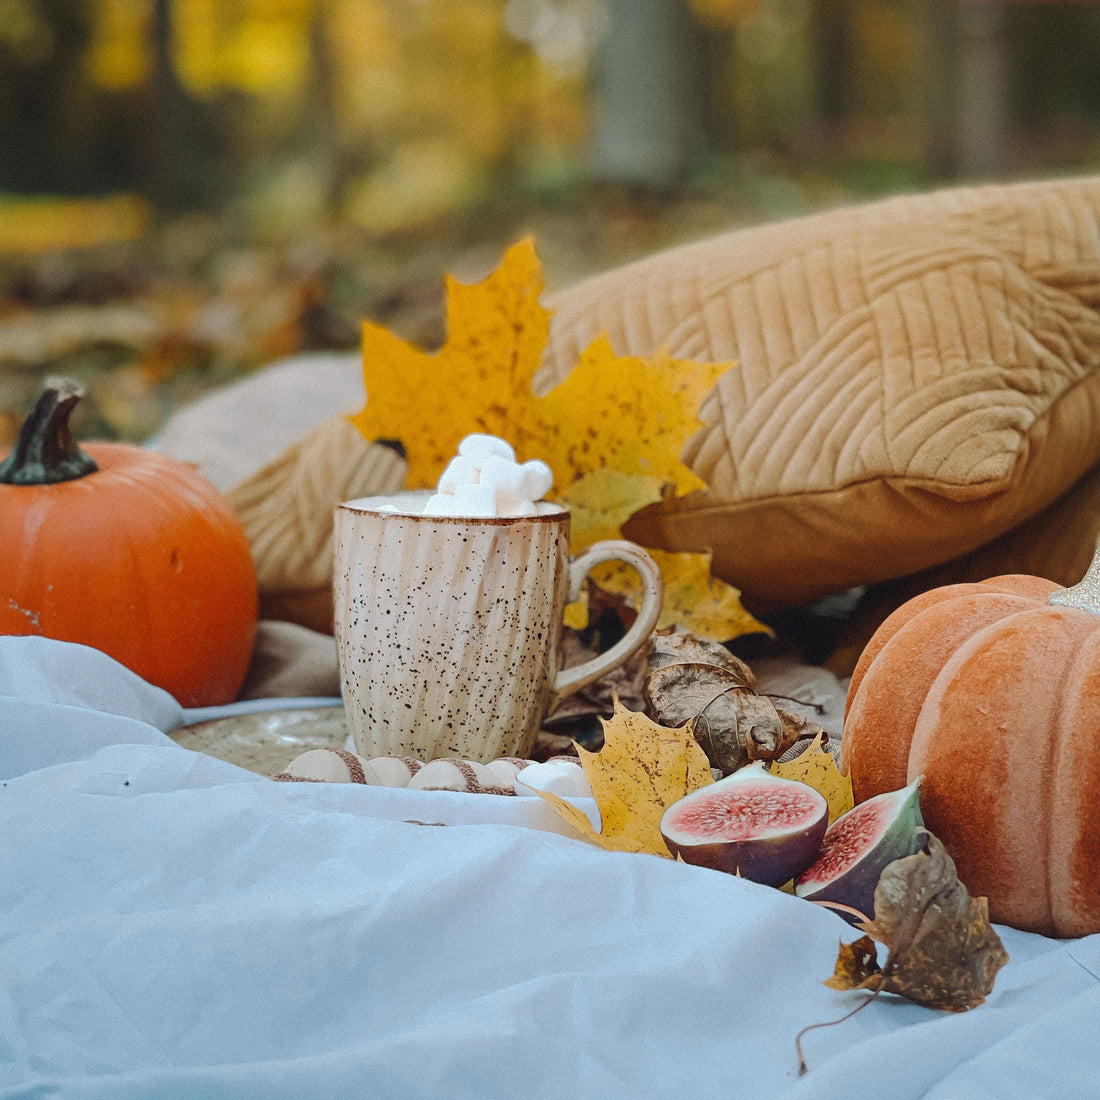 5 Autumn Inspired Latte Recipes To Make At Home